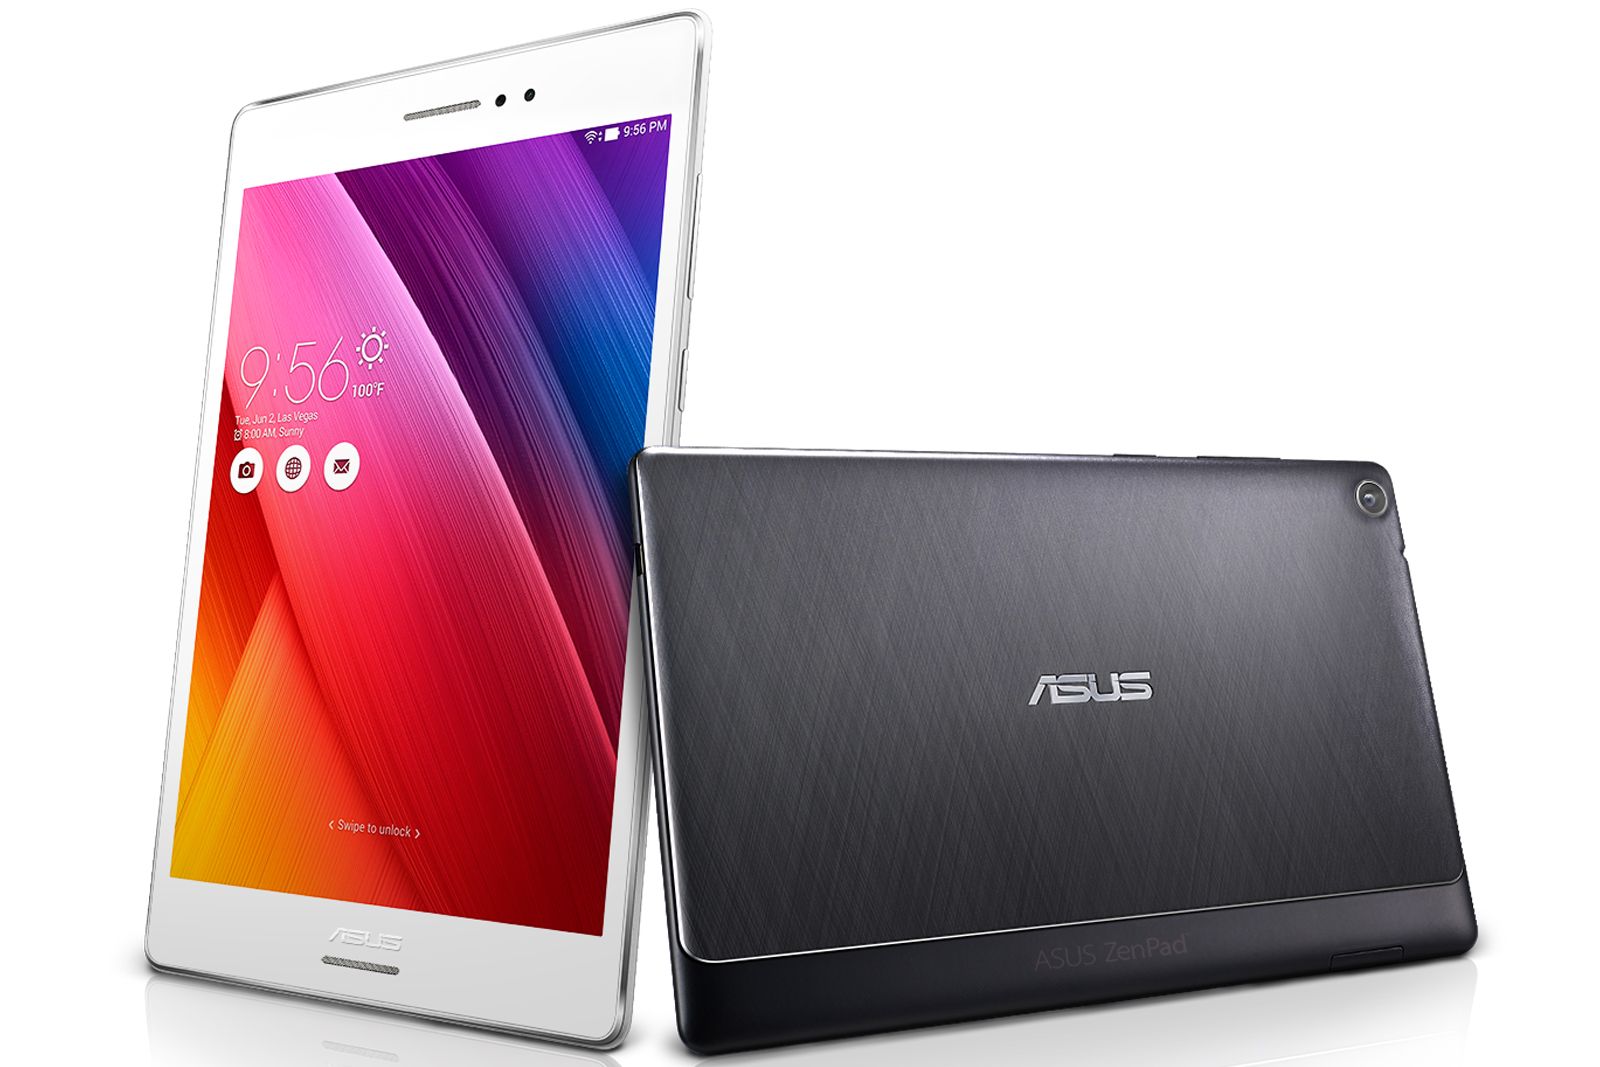 asus zenpad s 8 0 leads series update offering luxury finish stylus support image 1